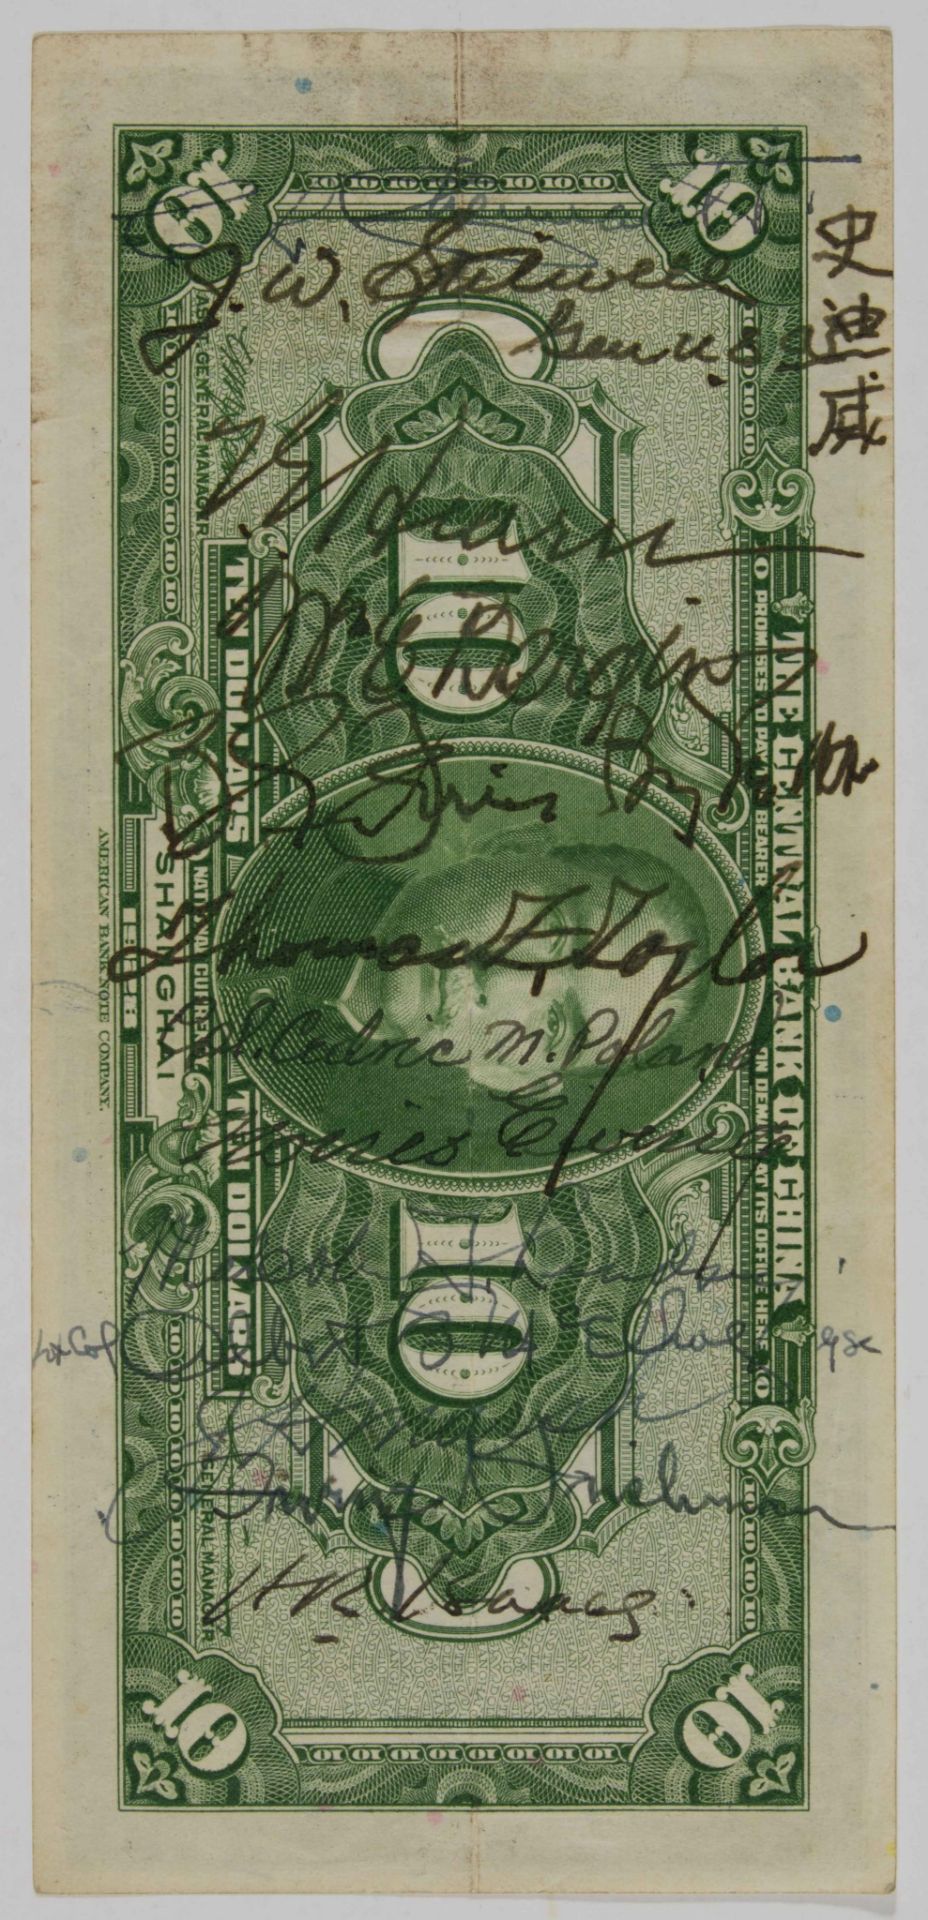 CHINESE 'SHORT SNORTER' SIGNED BY CHENNAULT TWICE, STILLWELL, OTHERS - Image 2 of 6